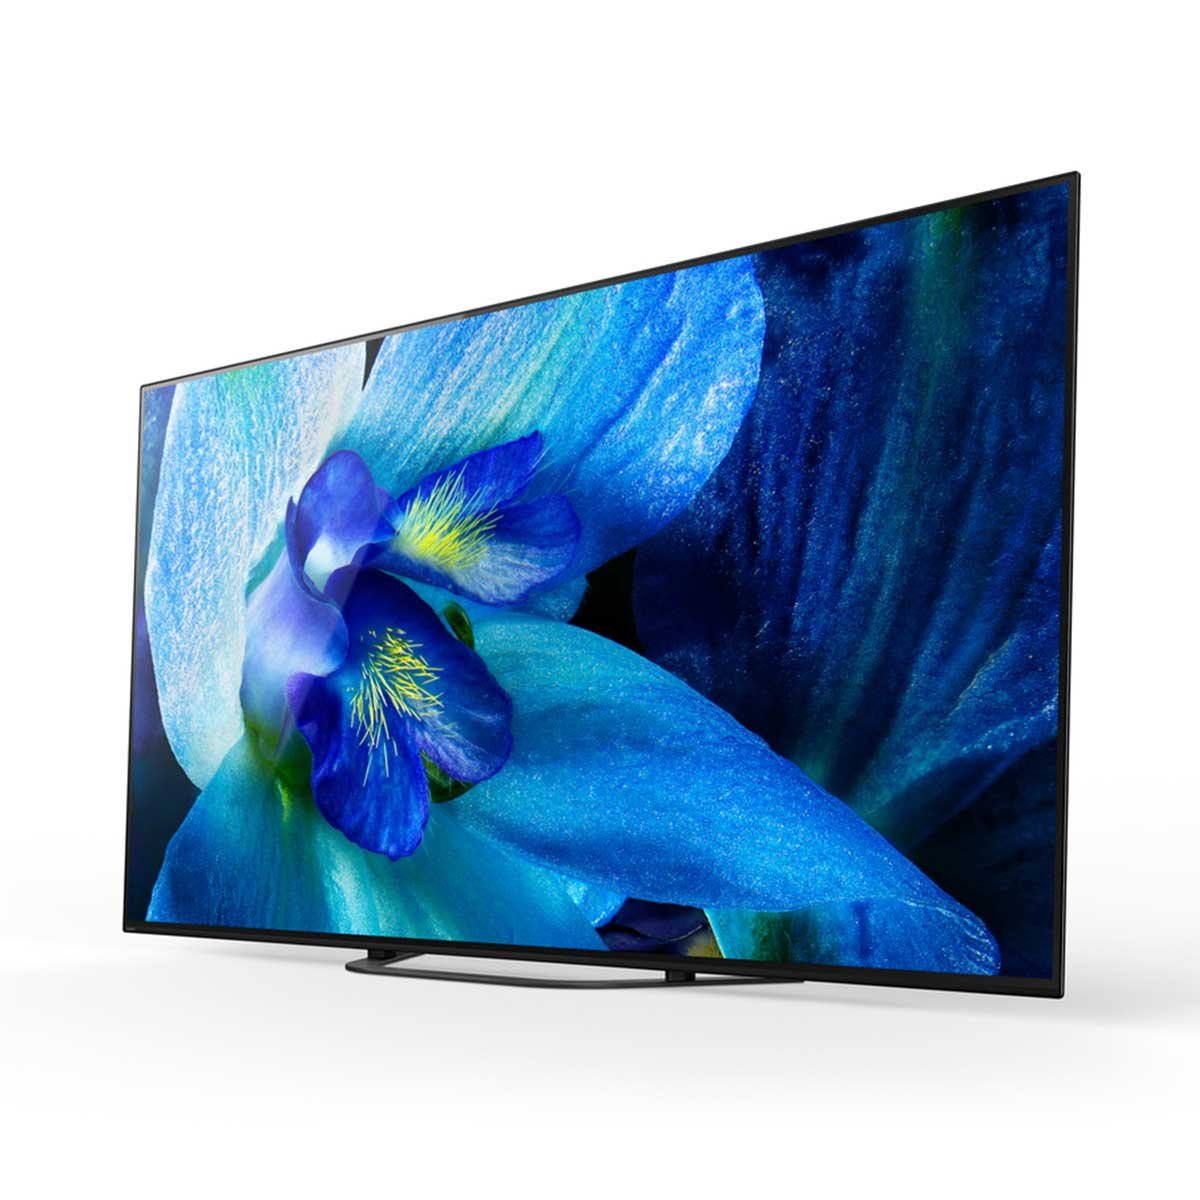 Pantalla 65" Oled 4K Ultra Hd Android Tv Serie A8G Sony